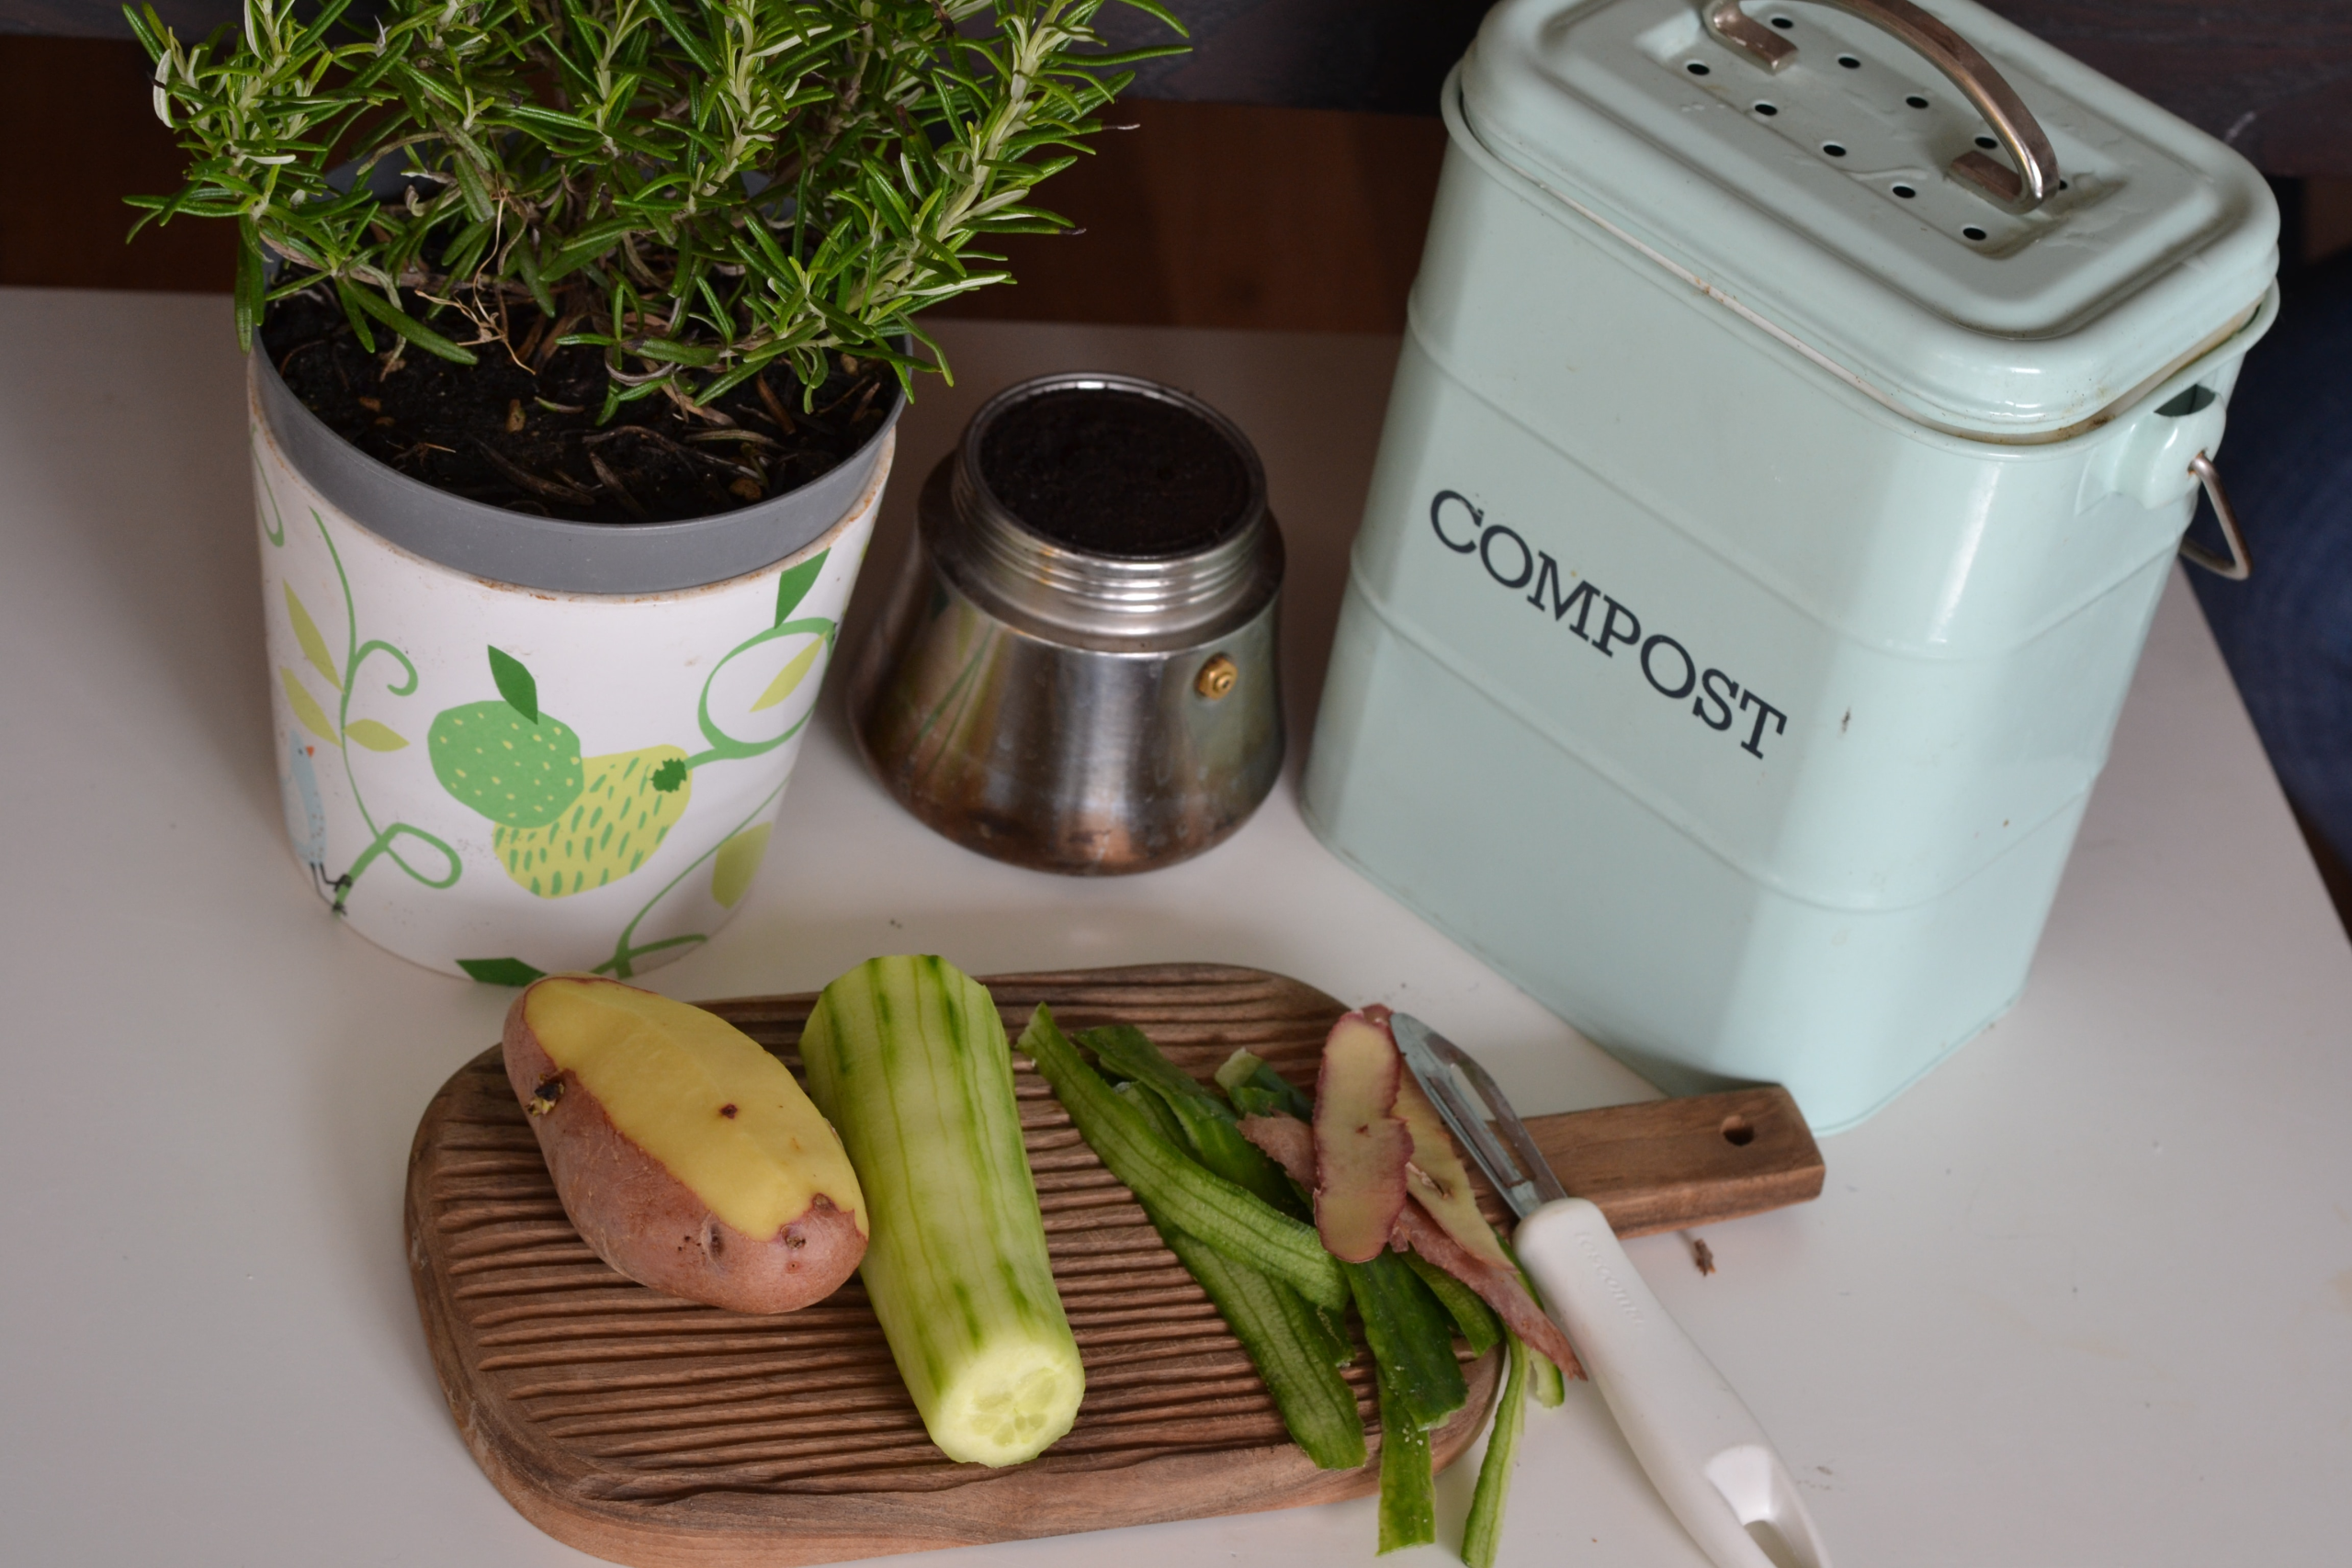 Vintage Compost Crock to hold kitchen scraps before they make it out to the  compost pile.